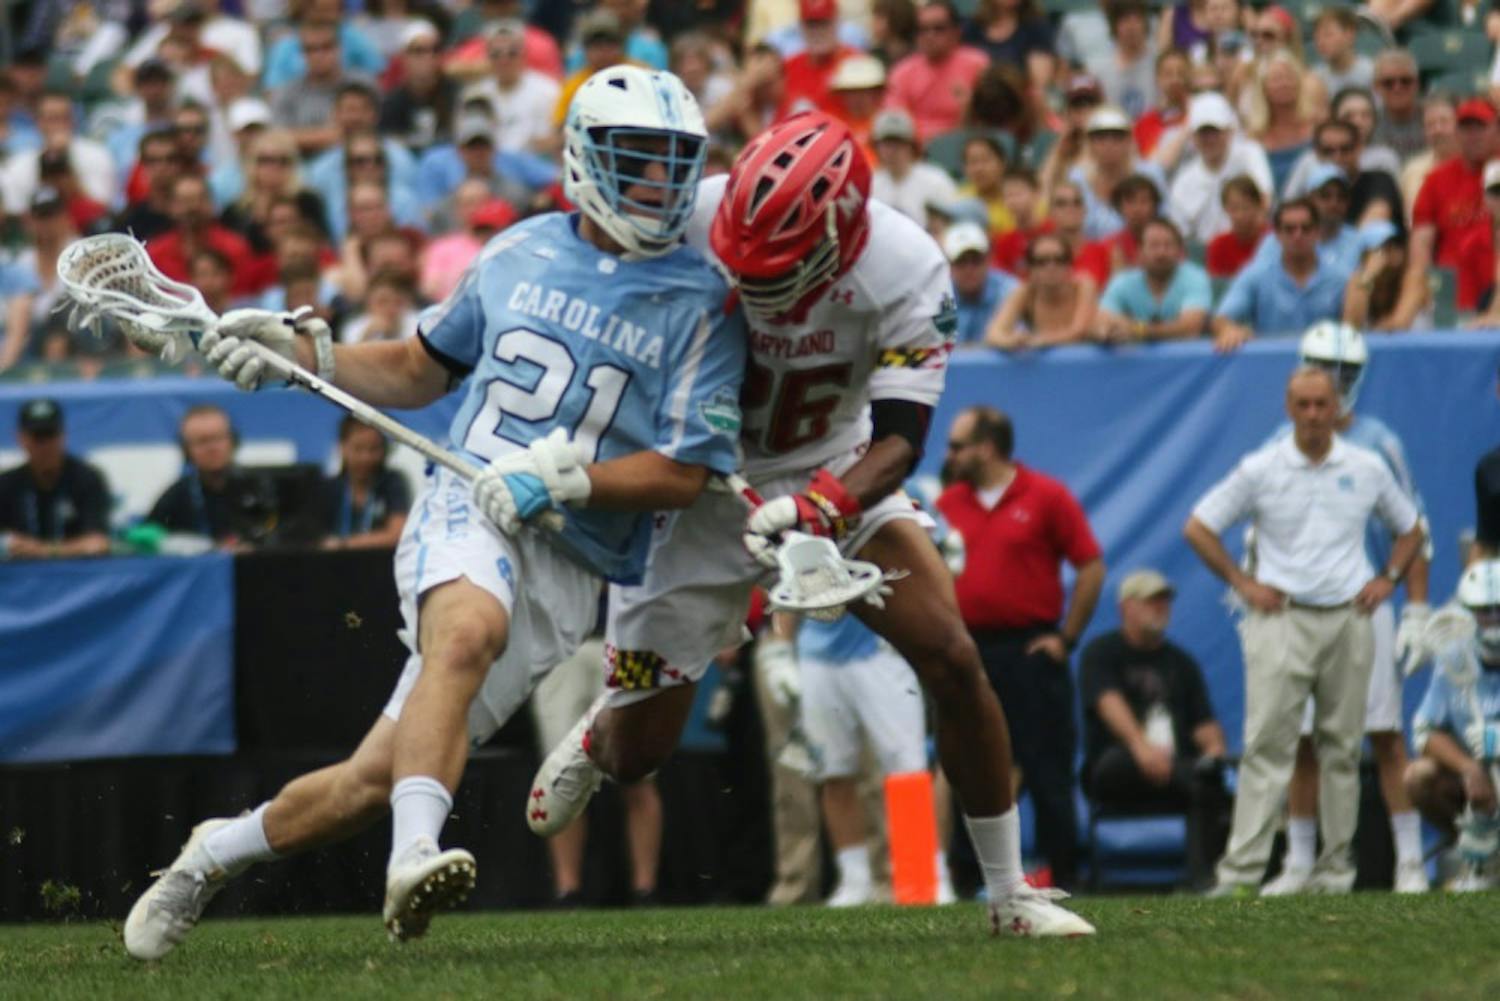 UNC midfielder Michael Tagliaferri (21) fights off a Maryland defender. The unseeded North Carolina men's lacrosse team defeated No. 1 Maryland 14-13 in overtime to claim the program's first national championship since 1993 in May&nbsp;at Lincoln Financial Field in Philadelphia. North Carolina faces Maryland this Saturday at 11:30.&nbsp;